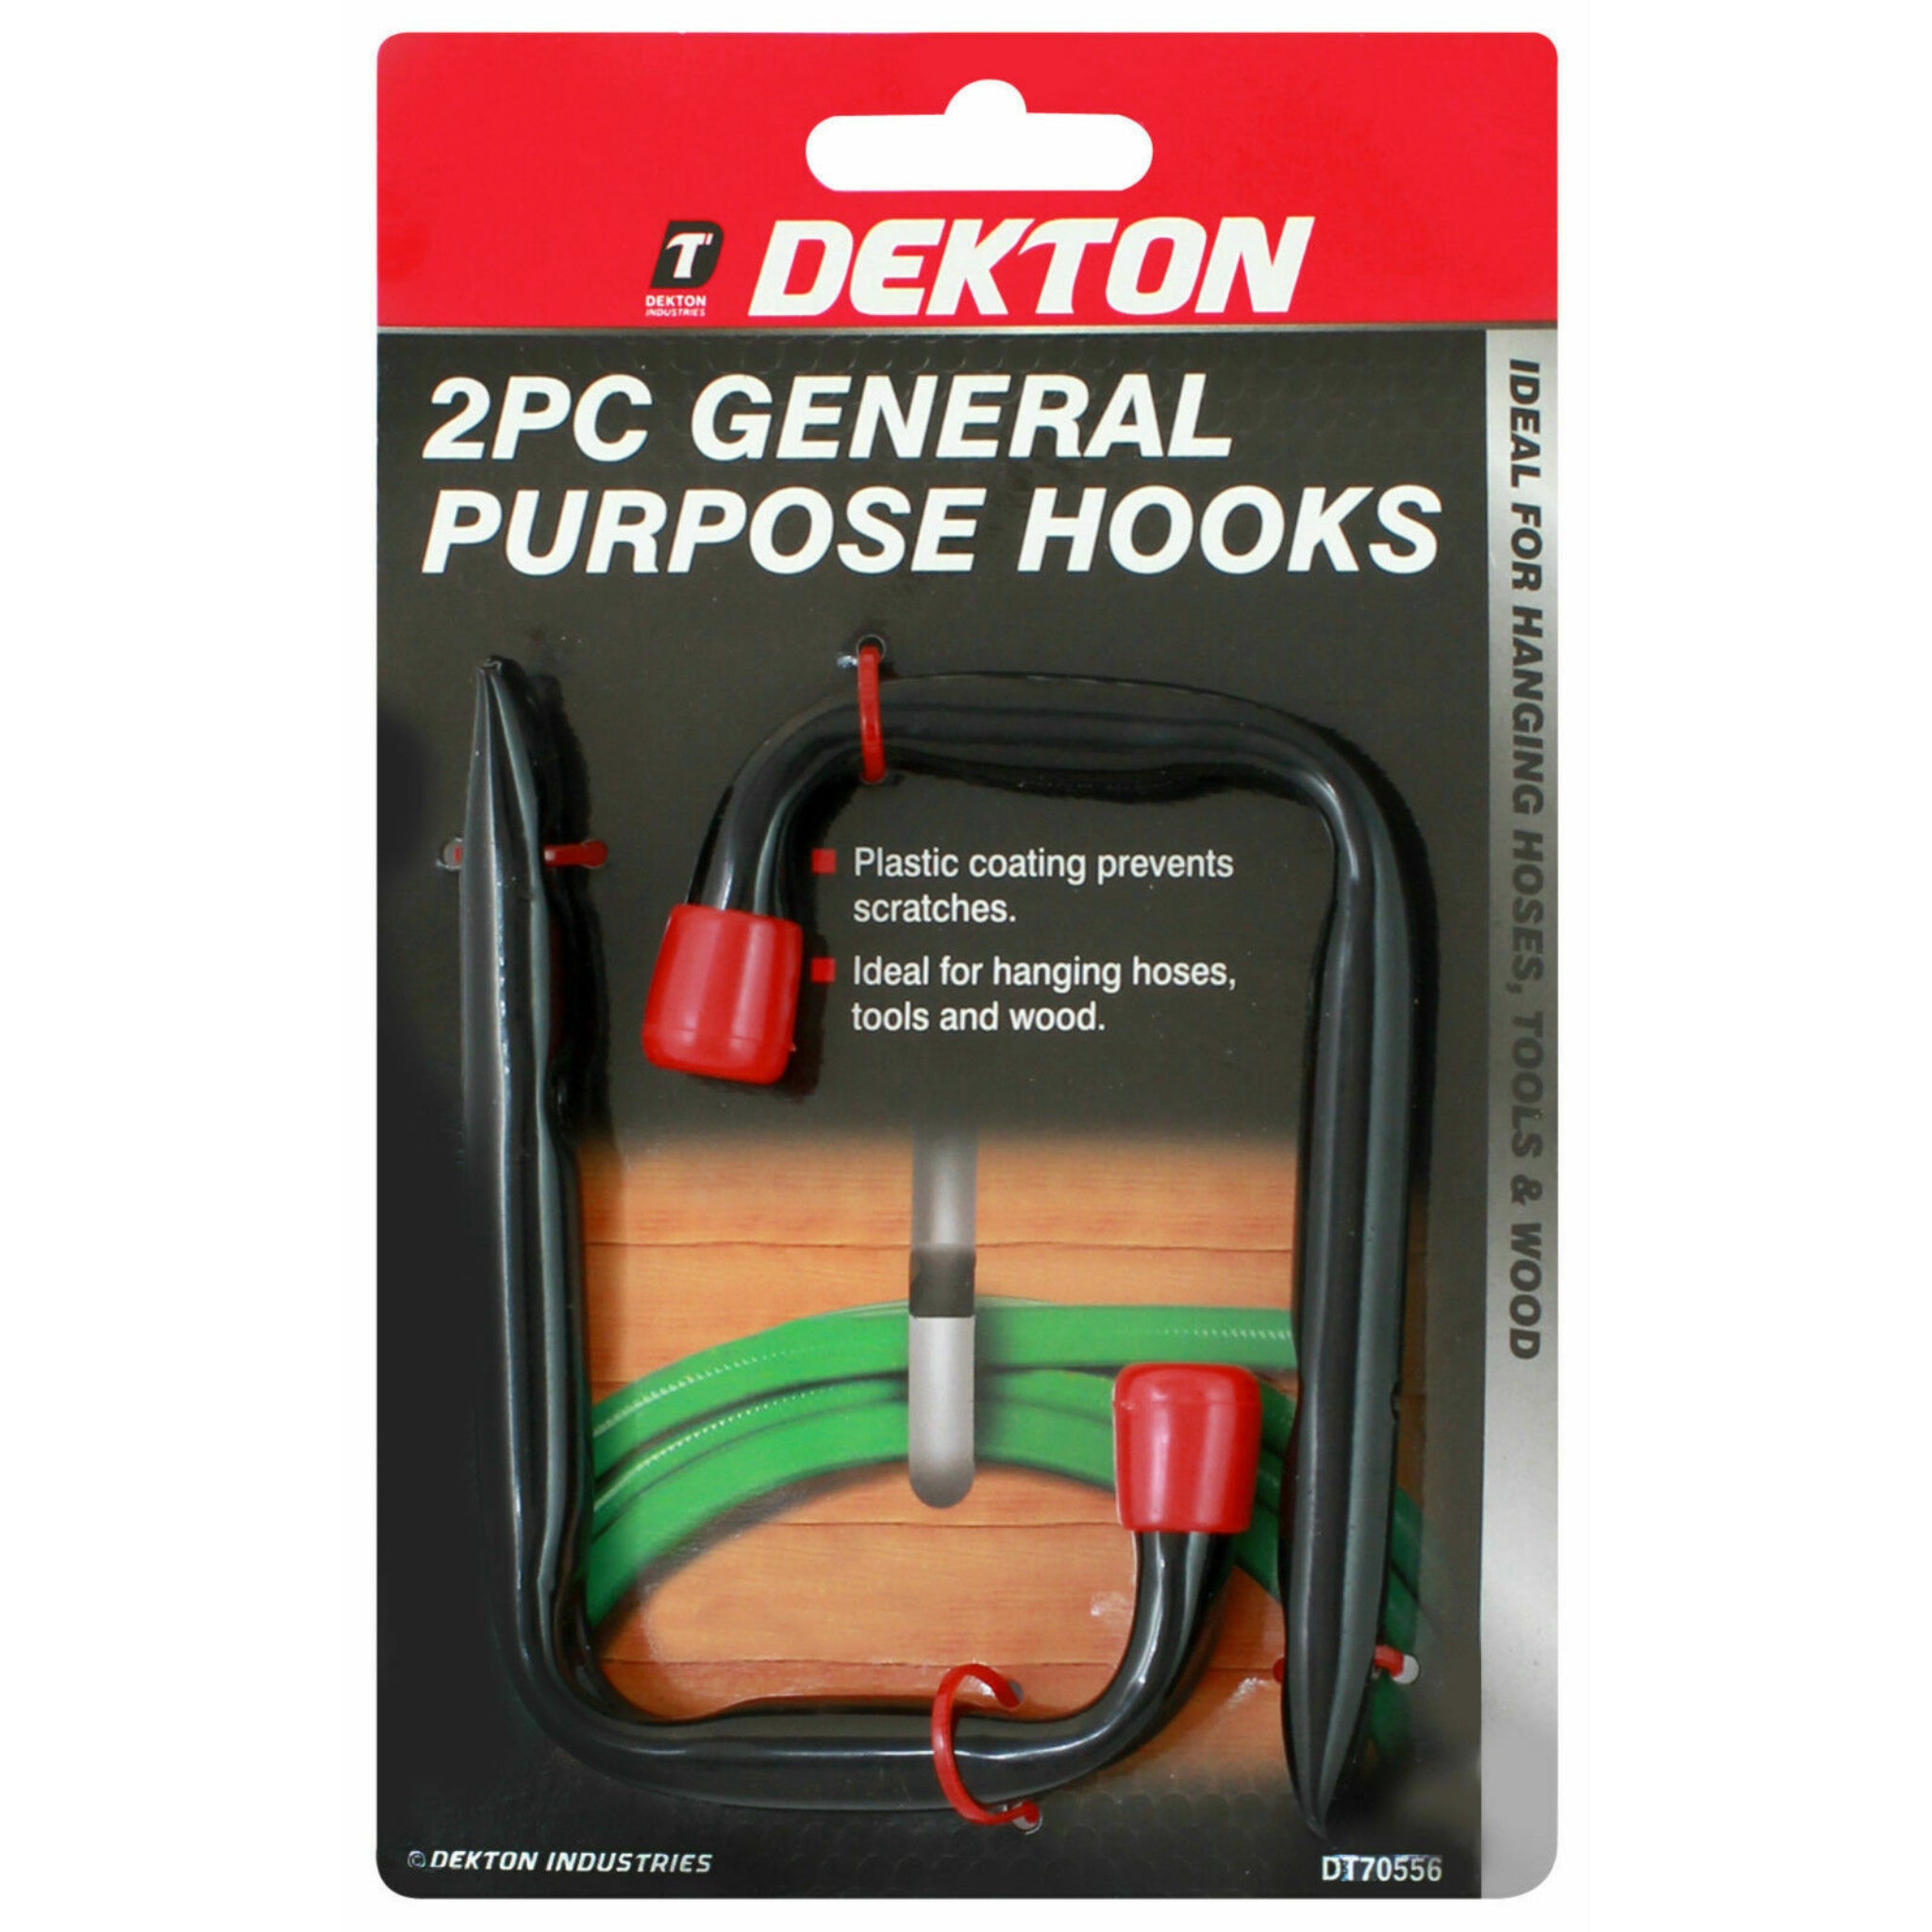 Beclen Harp 2pc General Purpose Hooks Set-Perfect Multi Utility Hooks For Bicycles Storage And Hanging Hoses/Tools/Wood